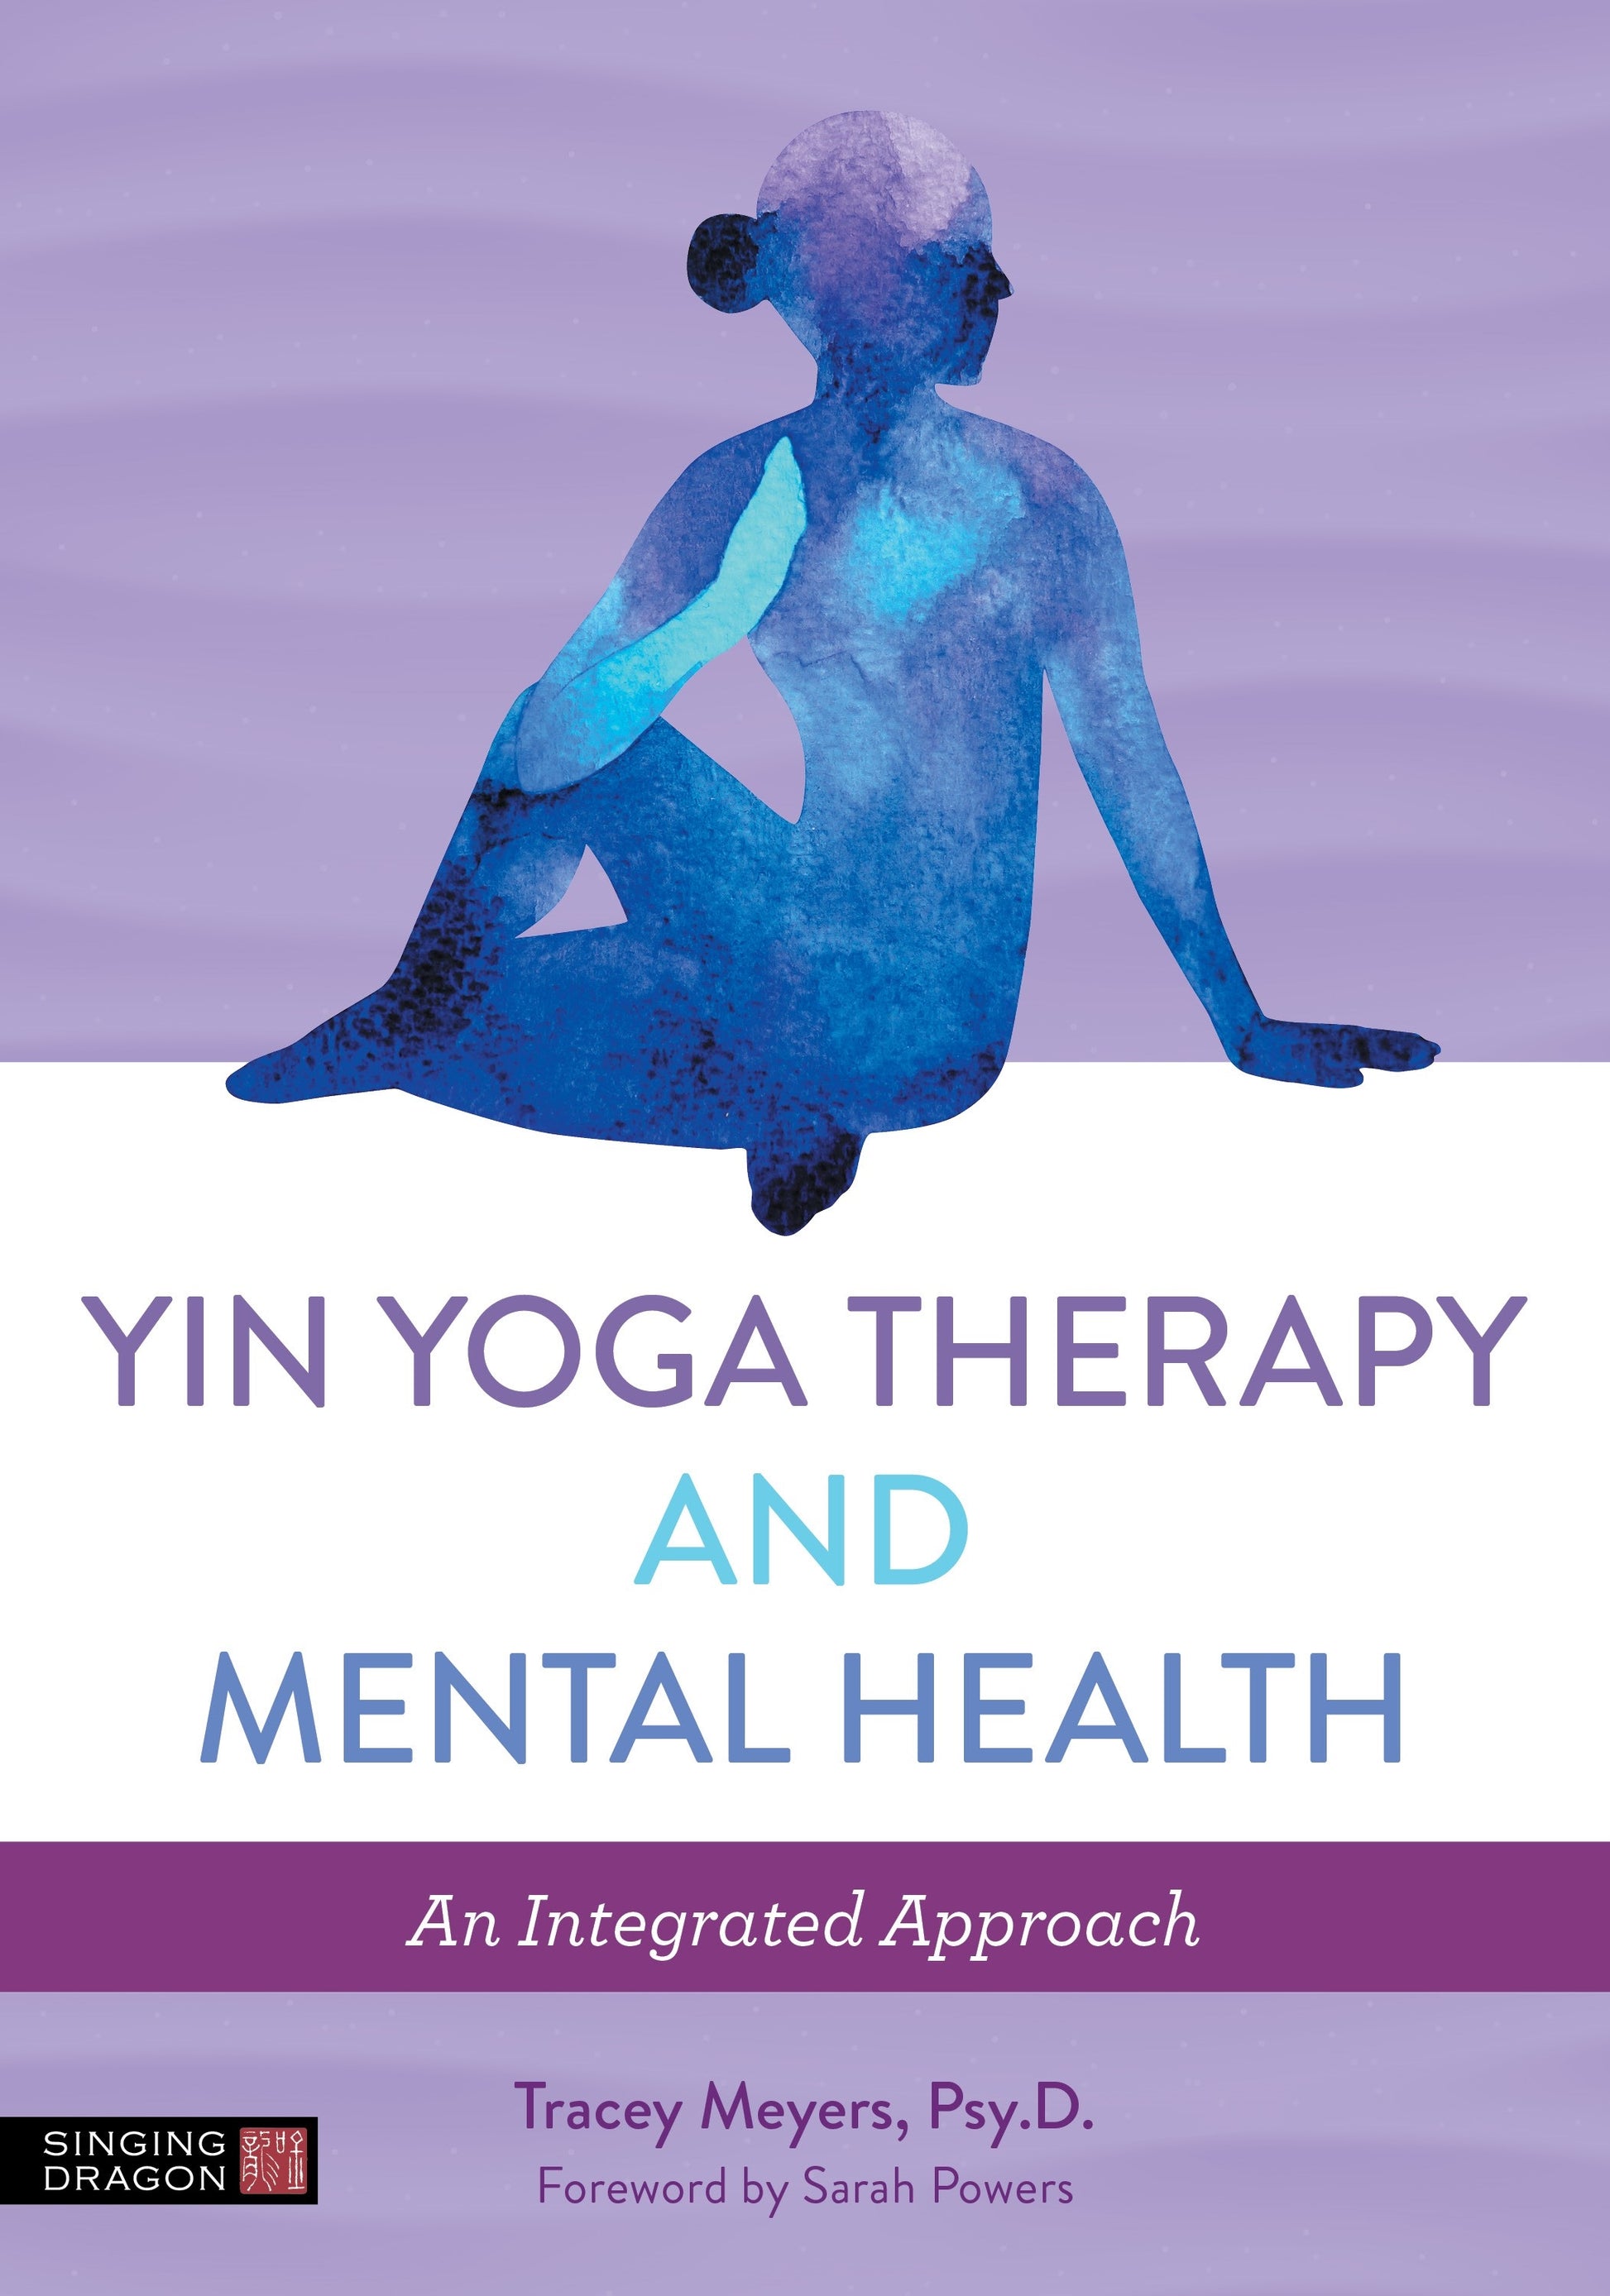 Yin Yoga Therapy and Mental Health by Sarah Powers, Tracey Meyers